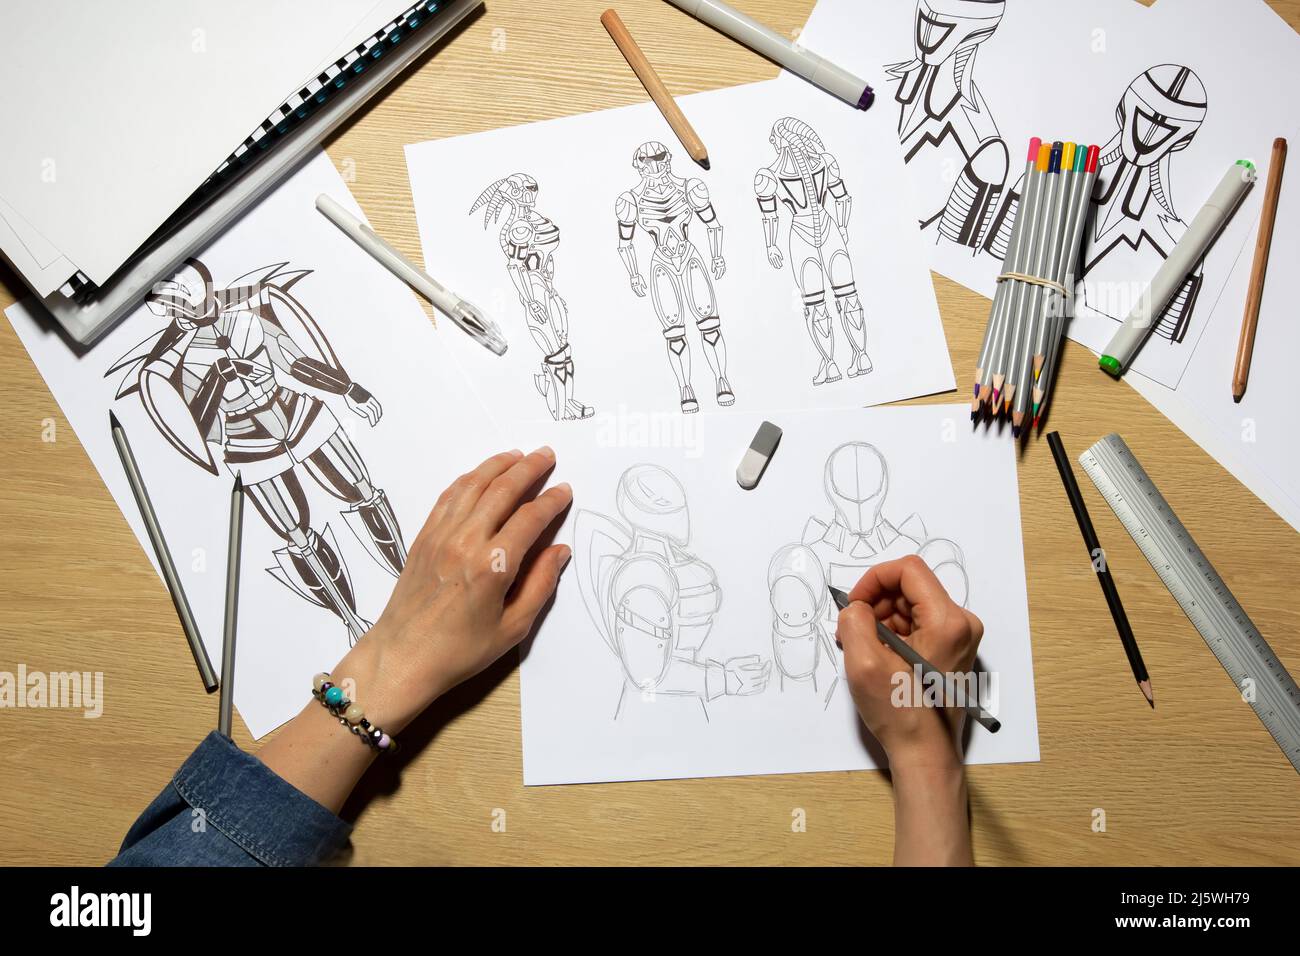 Concept art. The artist draws sketches of cyborg robots on paper. Character design for a video game. Animation creation. Stock Photo